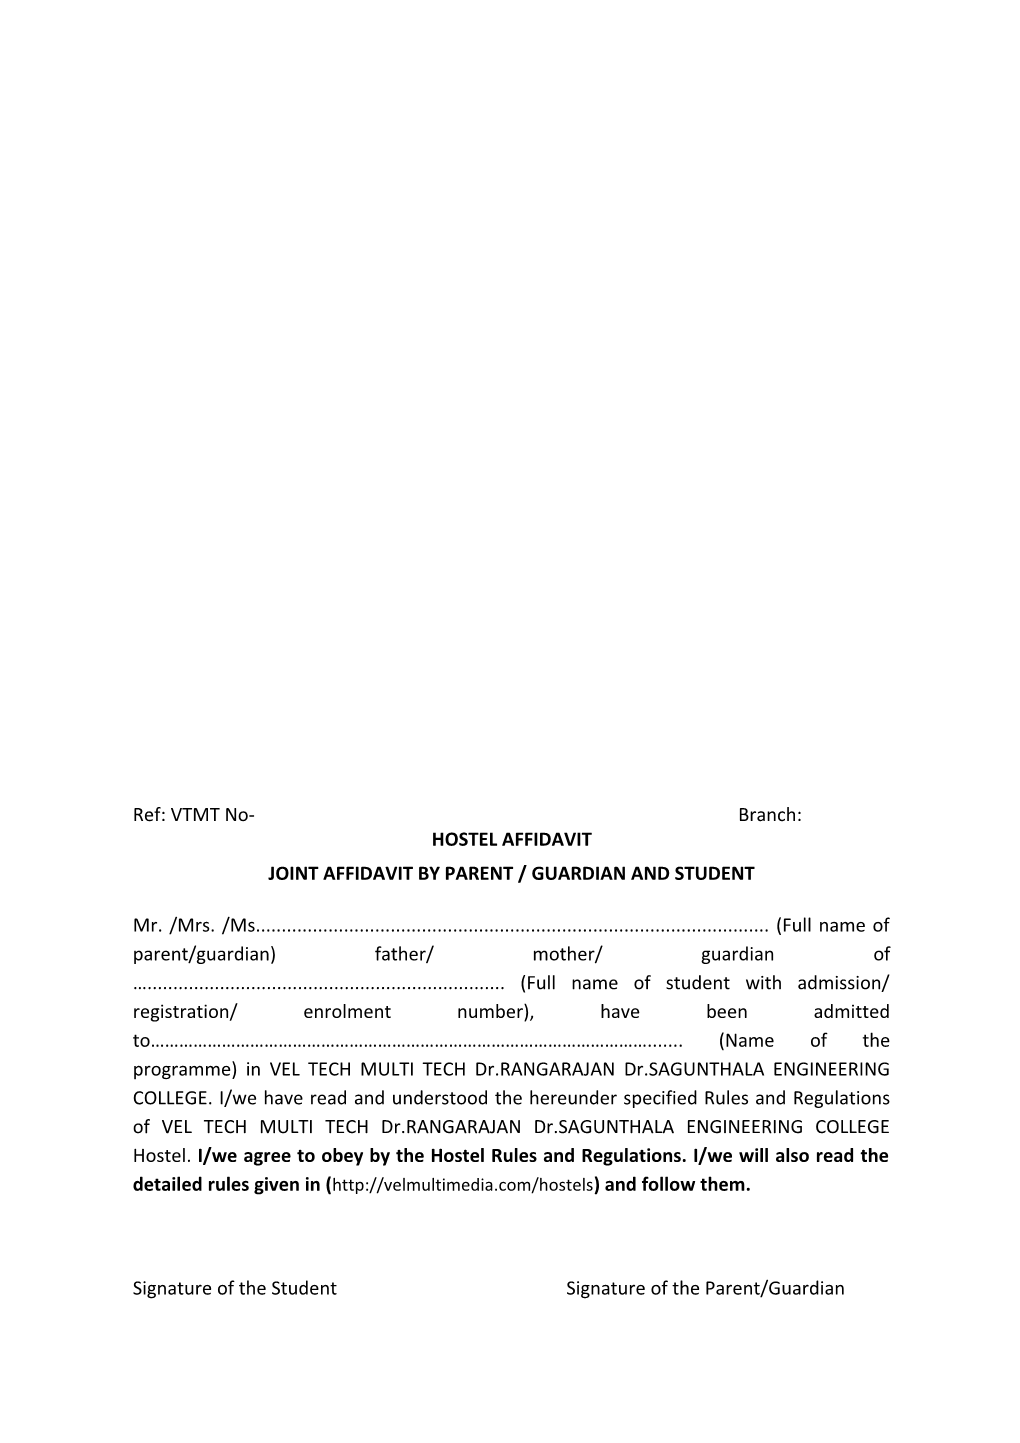 Joint Affidavit by Parent / Guardian and Student